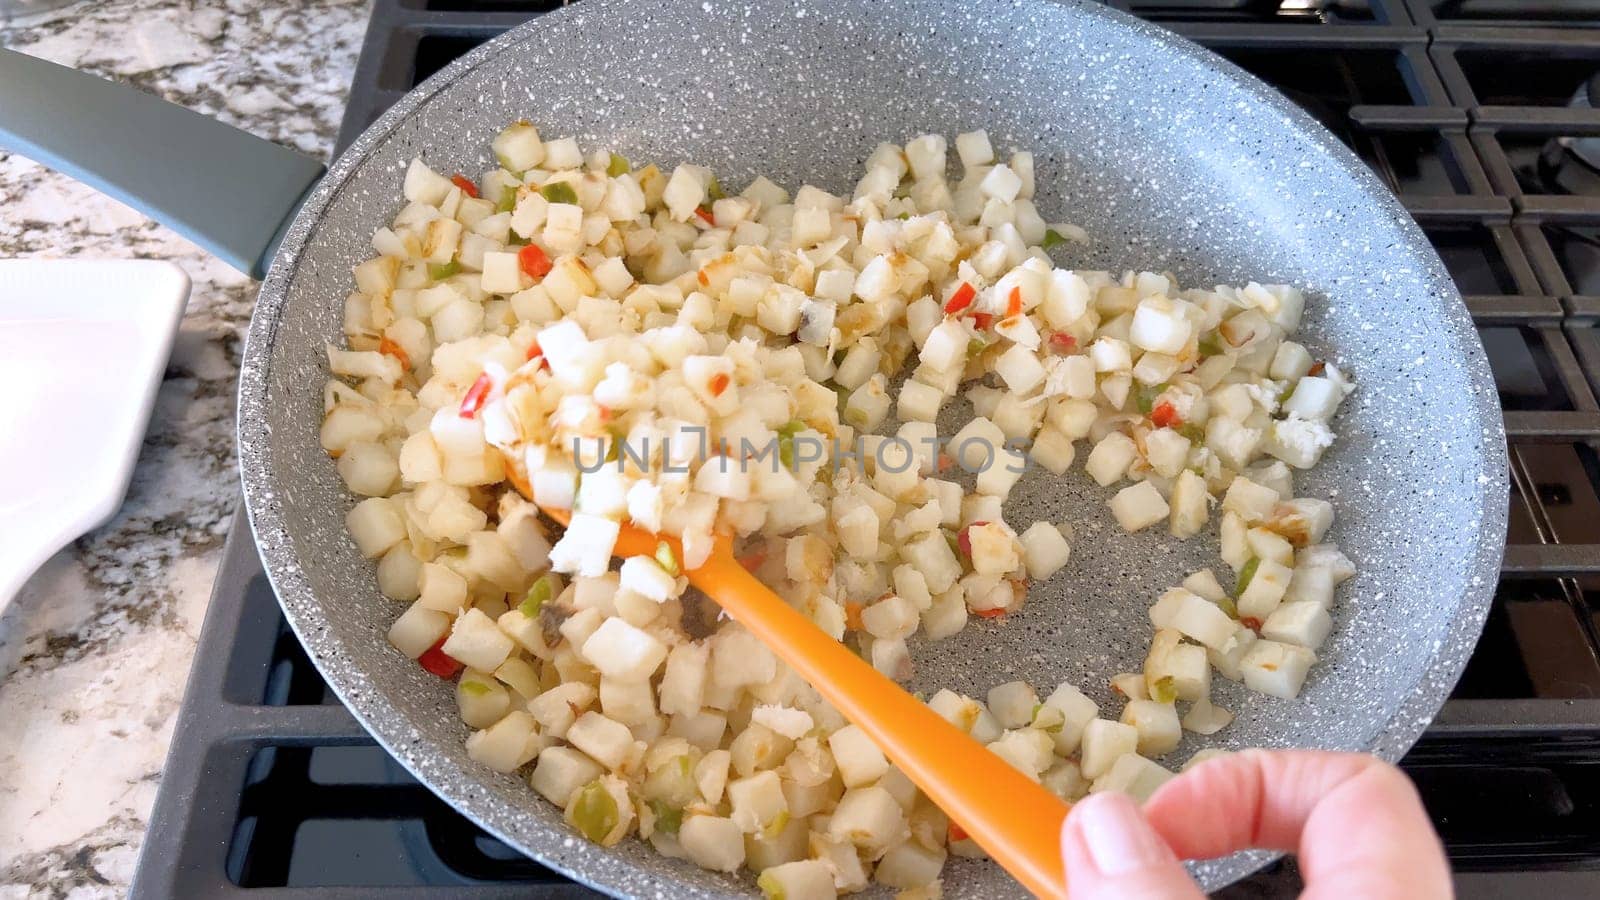 A frying pan on a gas stove sizzles with diced potatoes and colorful bits of red and green peppers, showcasing a delicious and simple home-cooked side dish in the making.